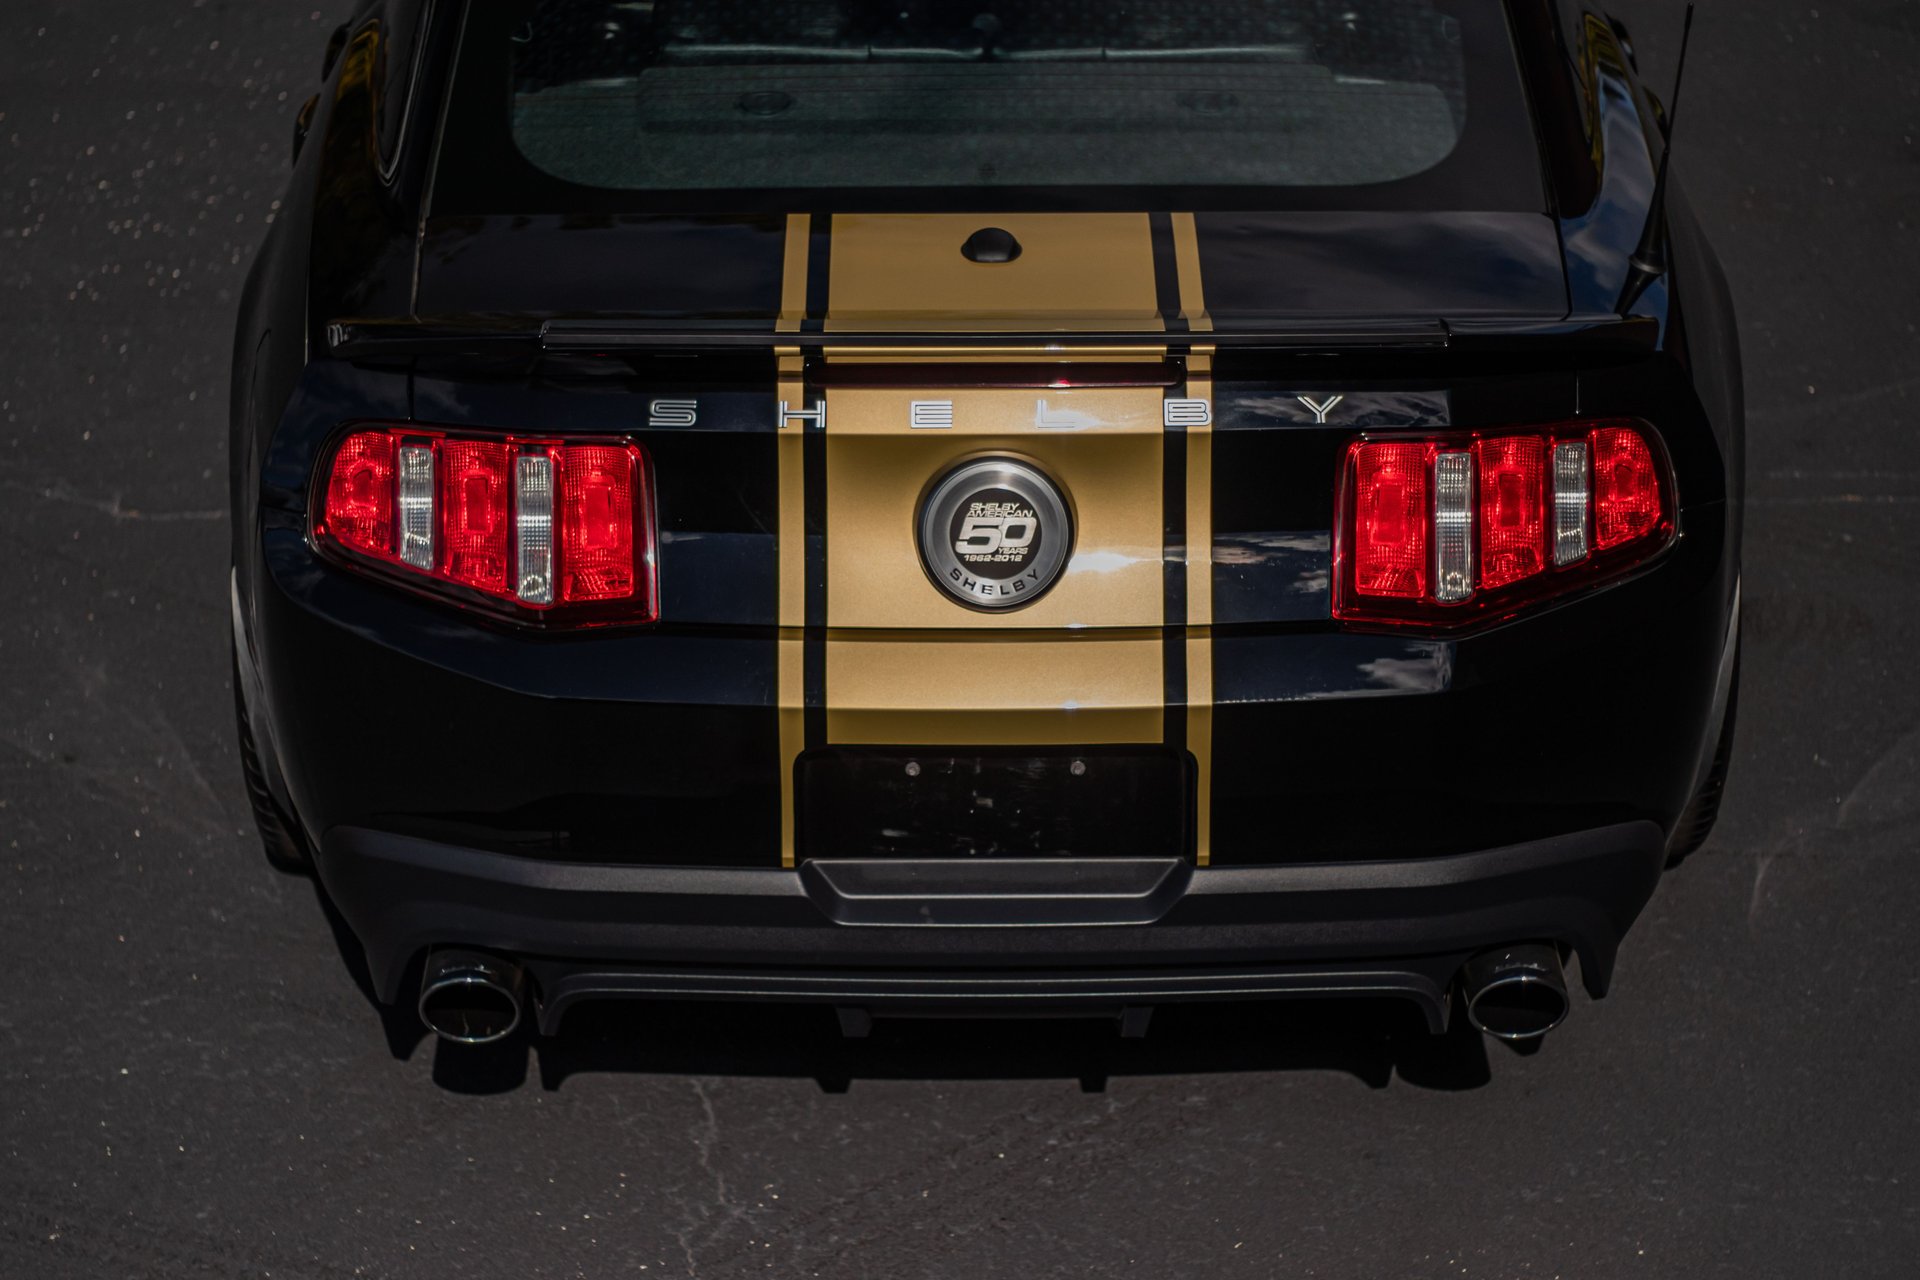 Broad Arrow Auctions | 2012 Shelby Mustang GT500 Super Snake 50th Anniversary